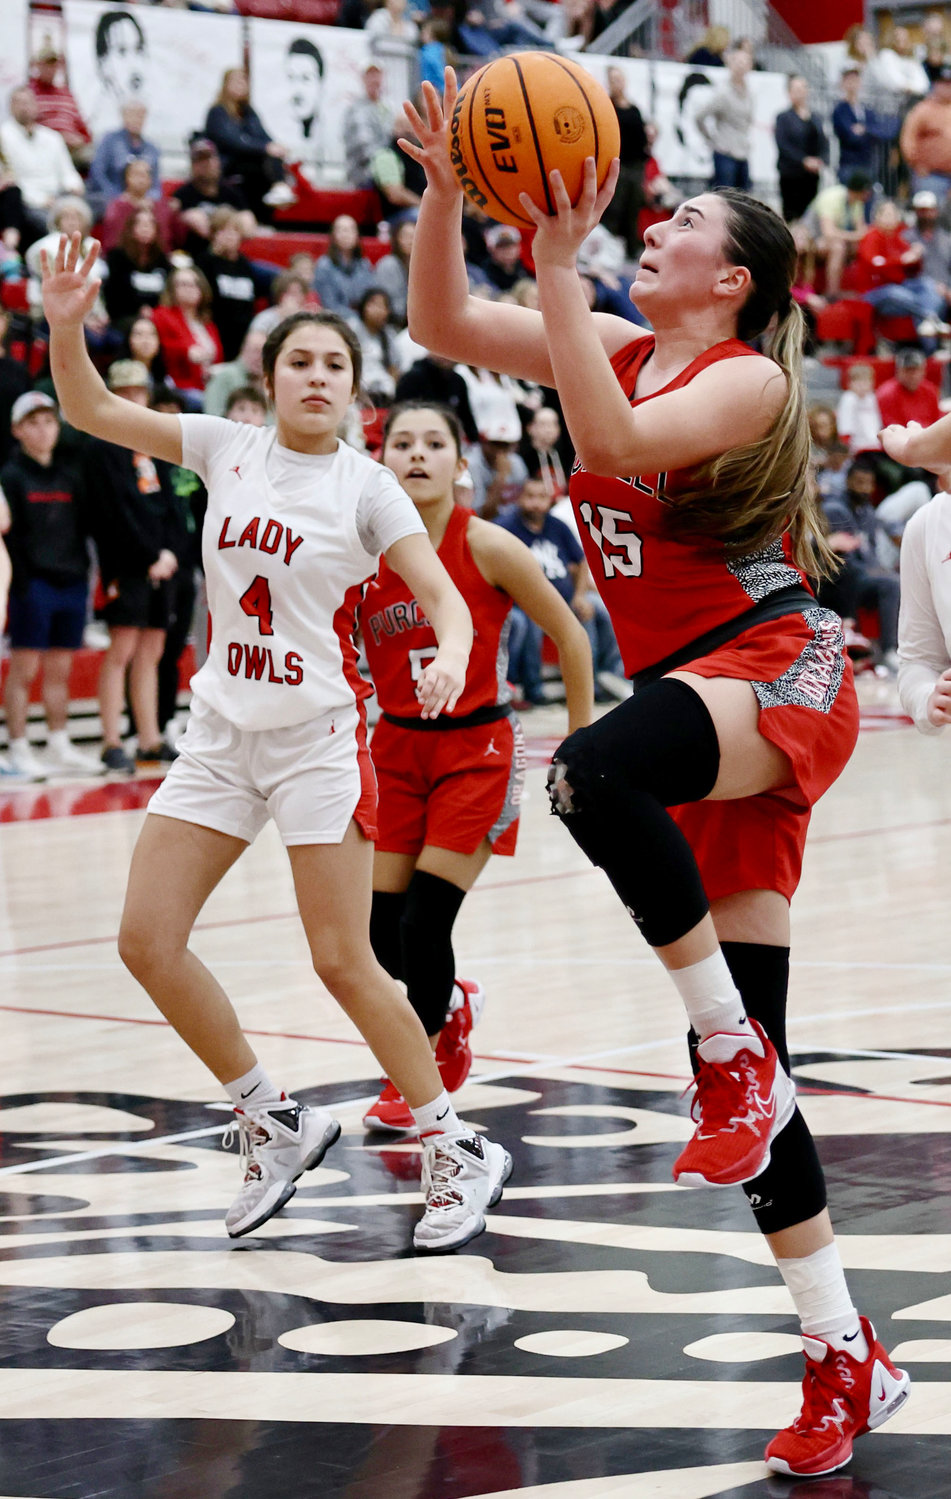 Purcell sophomore Ella Resendiz goes to the hoop with the basketball during the Dragons’ 53-44 win over Elgin in the Heart of Oklahoma Basketball Tournament. Resendiz scored a team-high 13 points in the game. She was also named to the All-Tournament team.